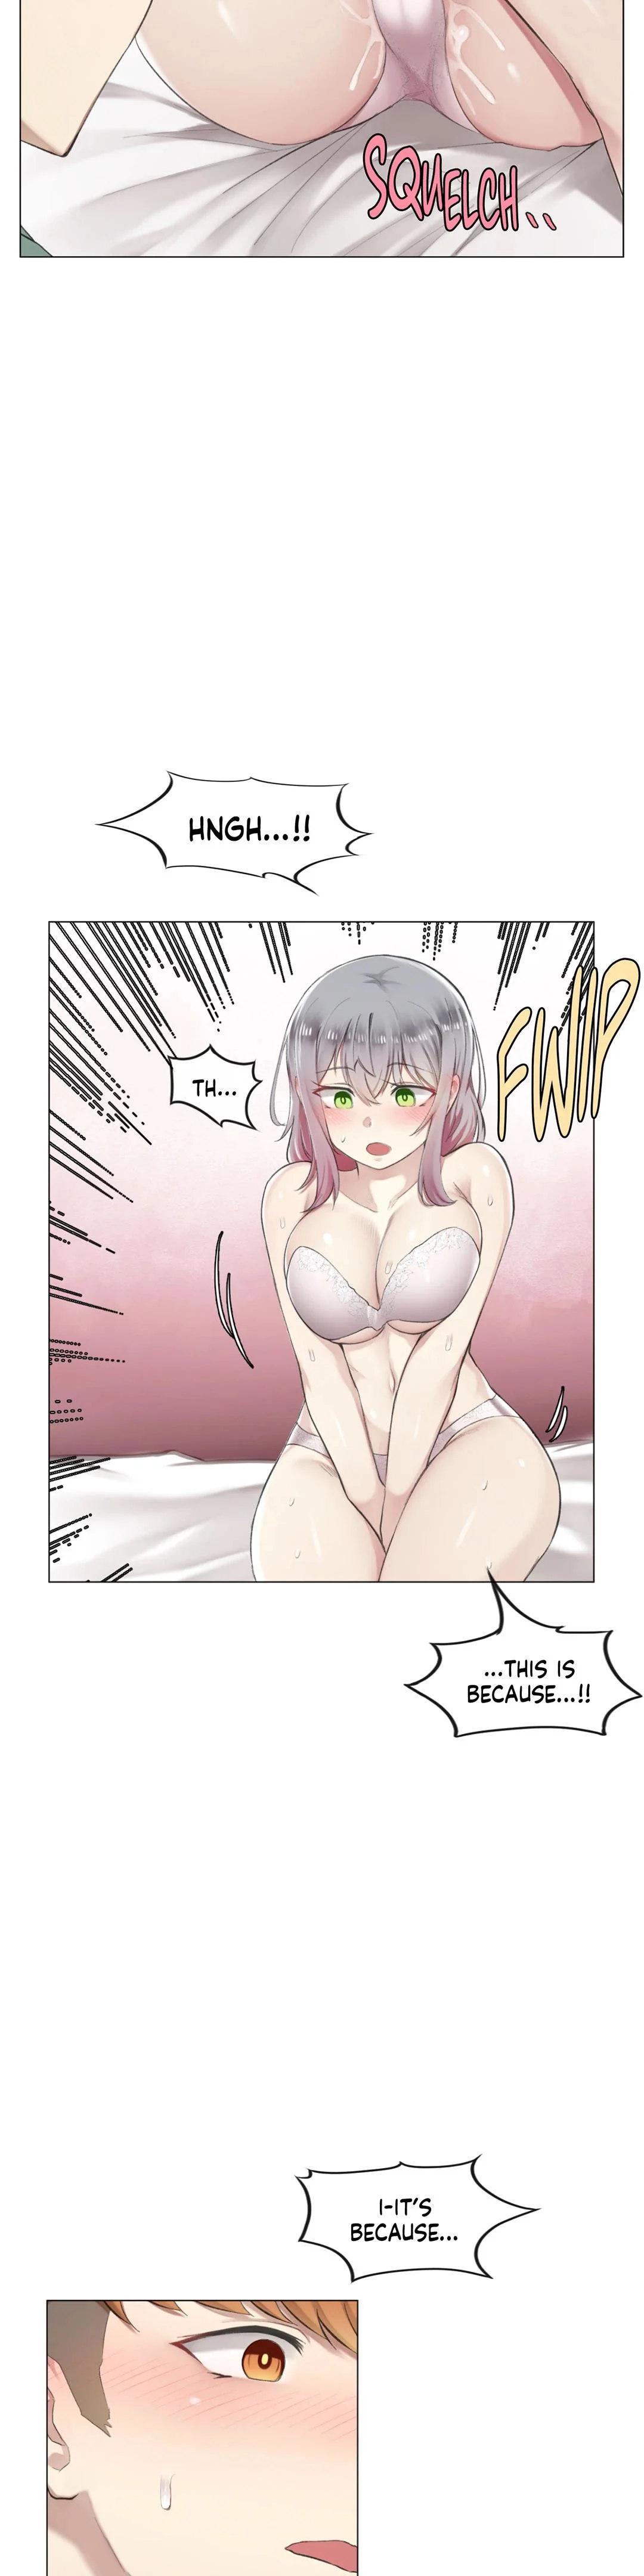 [Dumangoon, KONG_] Sexcape Room: Snap Off Ch.7/7 [English] [Manhwa PDF] Completed 75